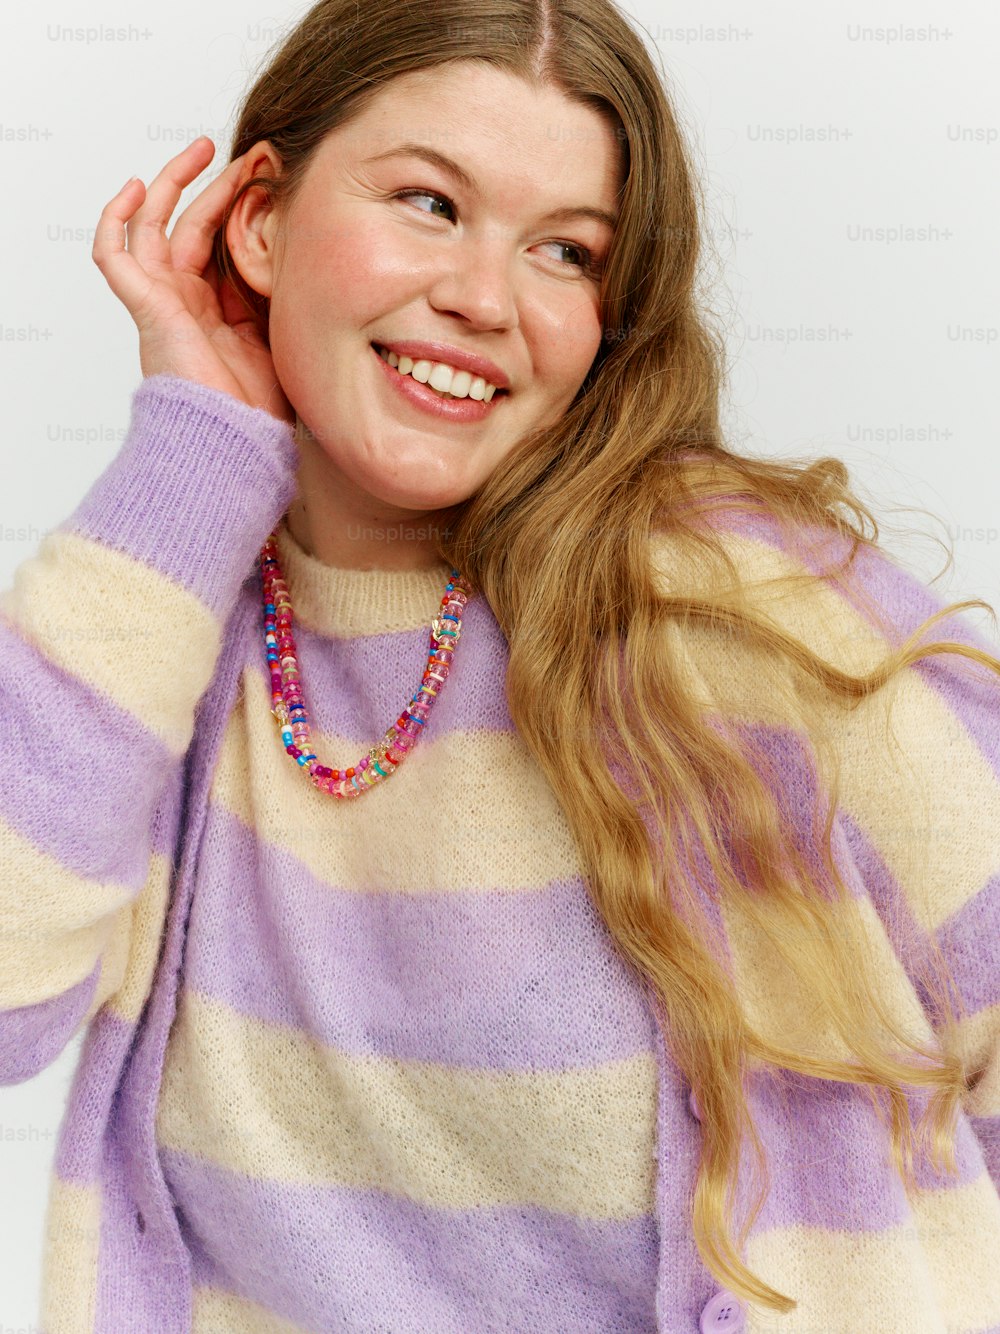 a woman wearing a purple and white striped sweater